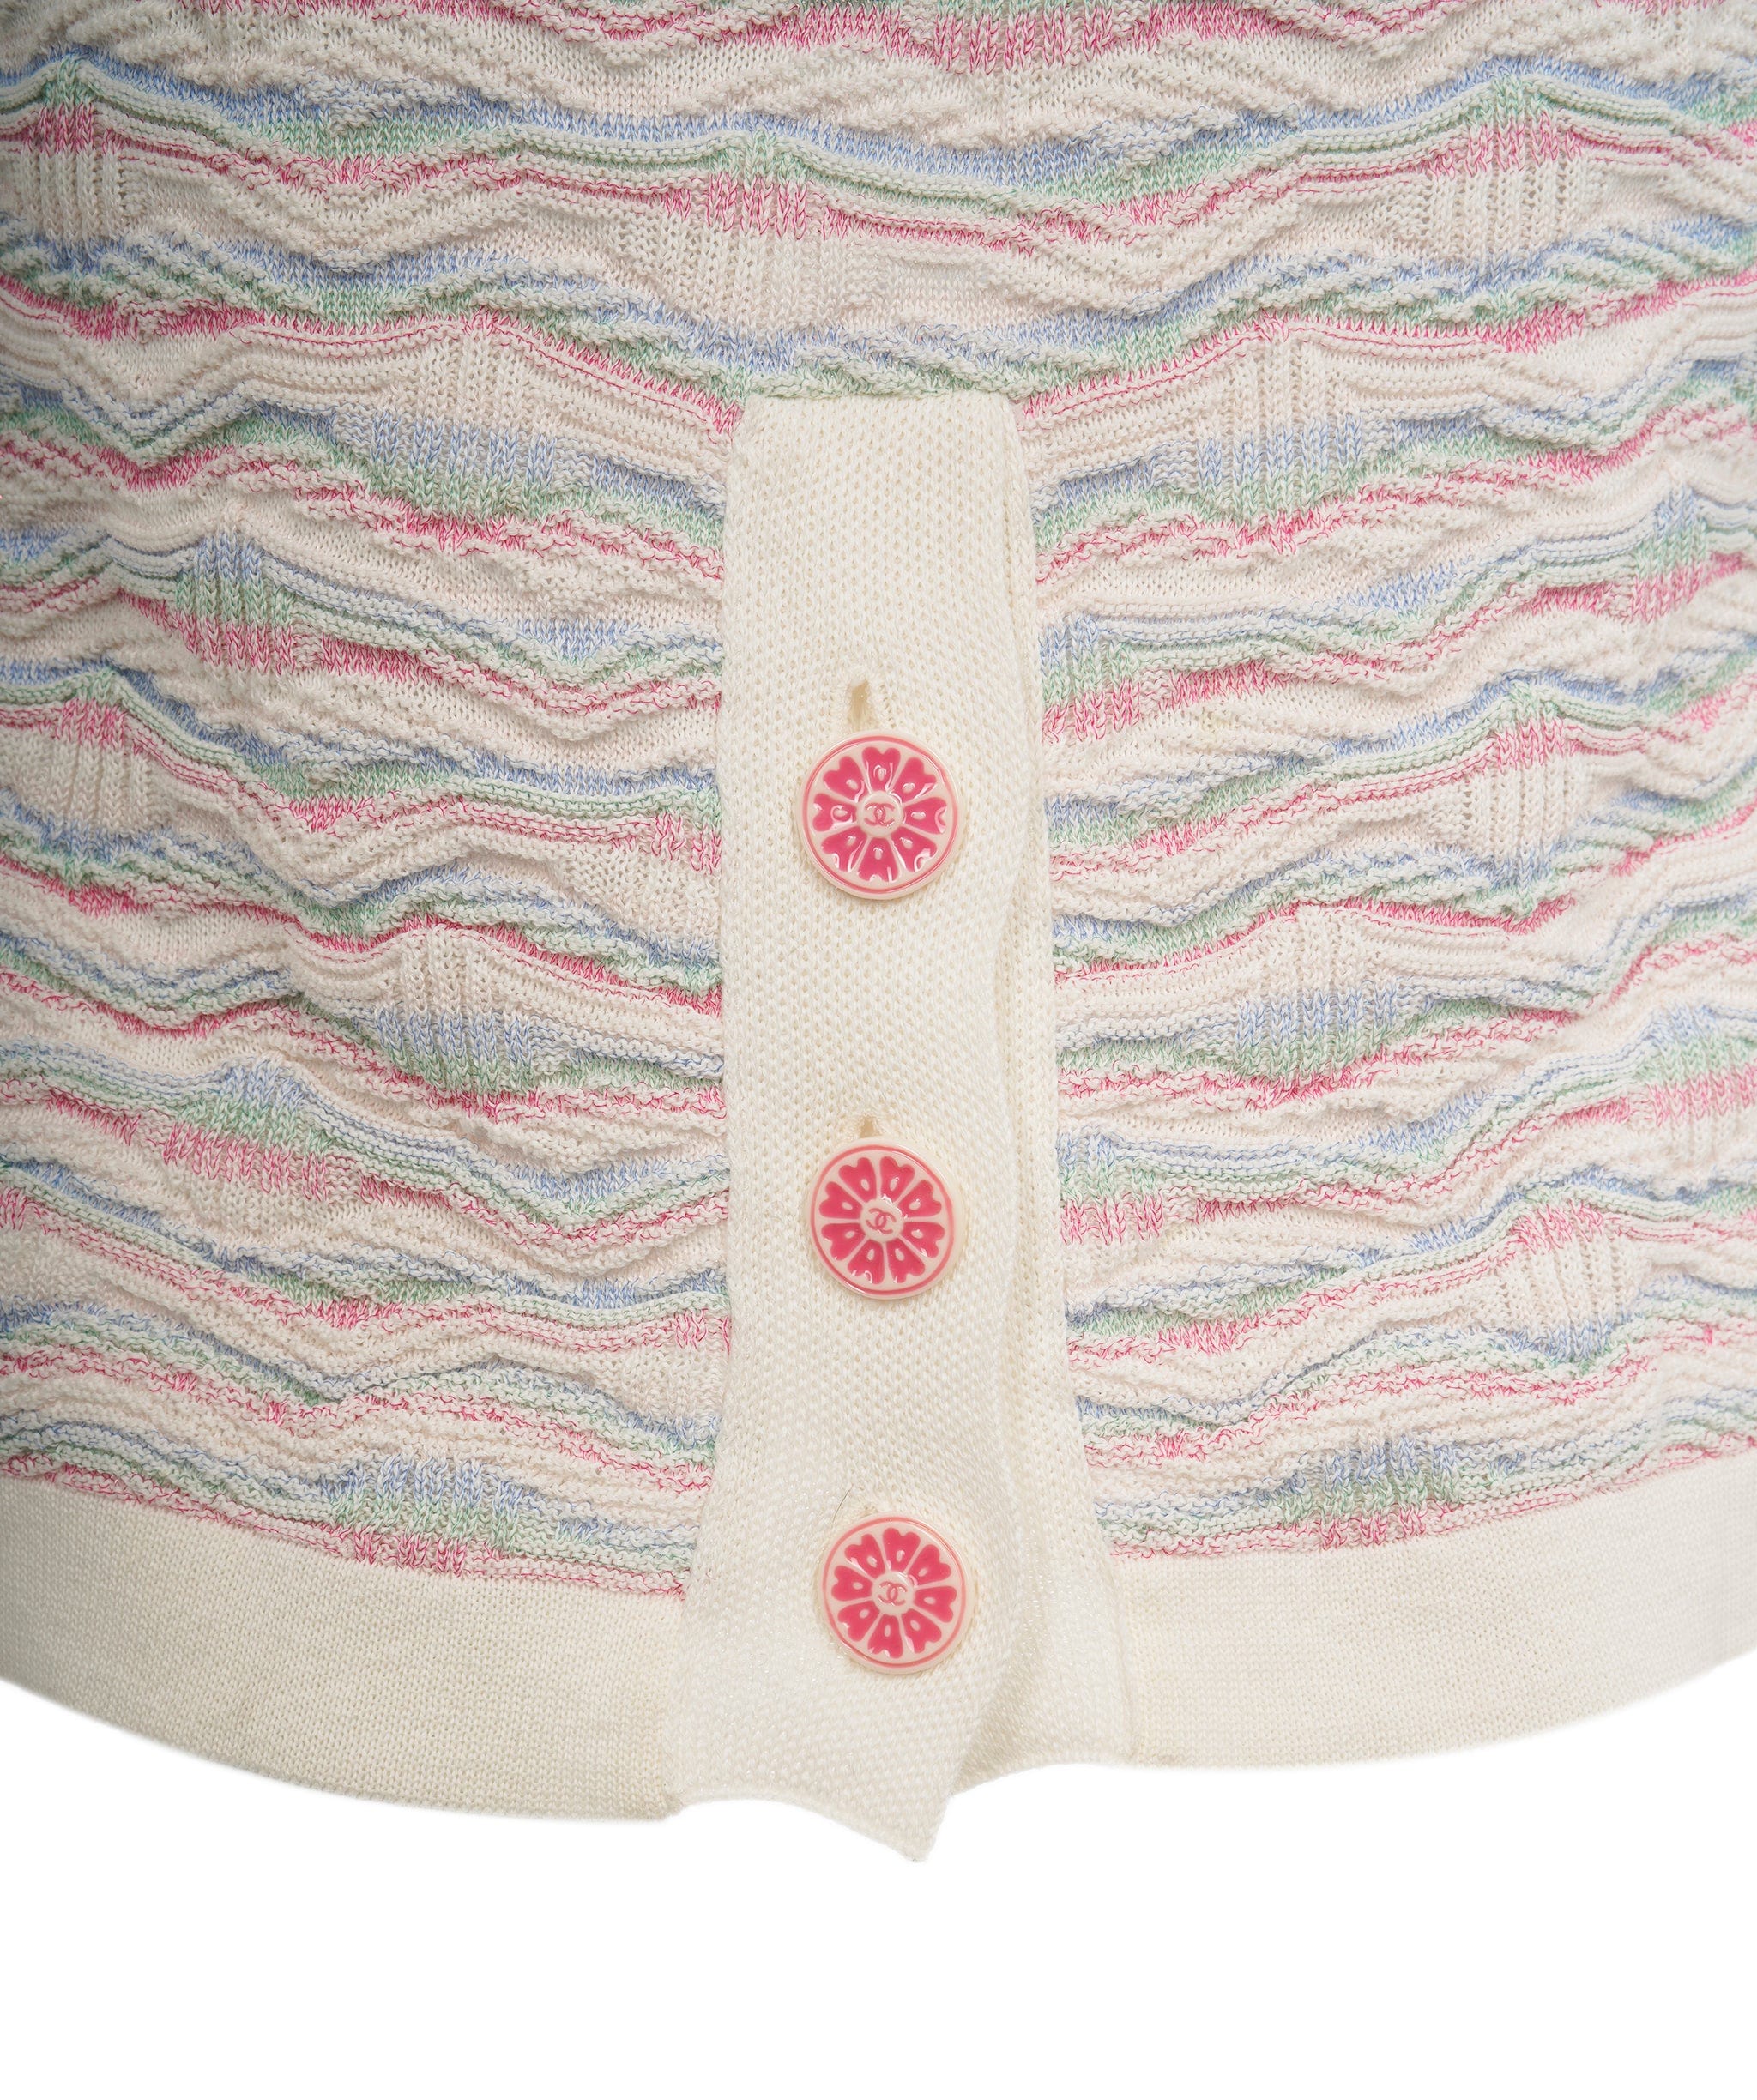 Chanel Chanel dress white with multicolor and grapefruit buttons FR36 P53218K06909 AVC1971